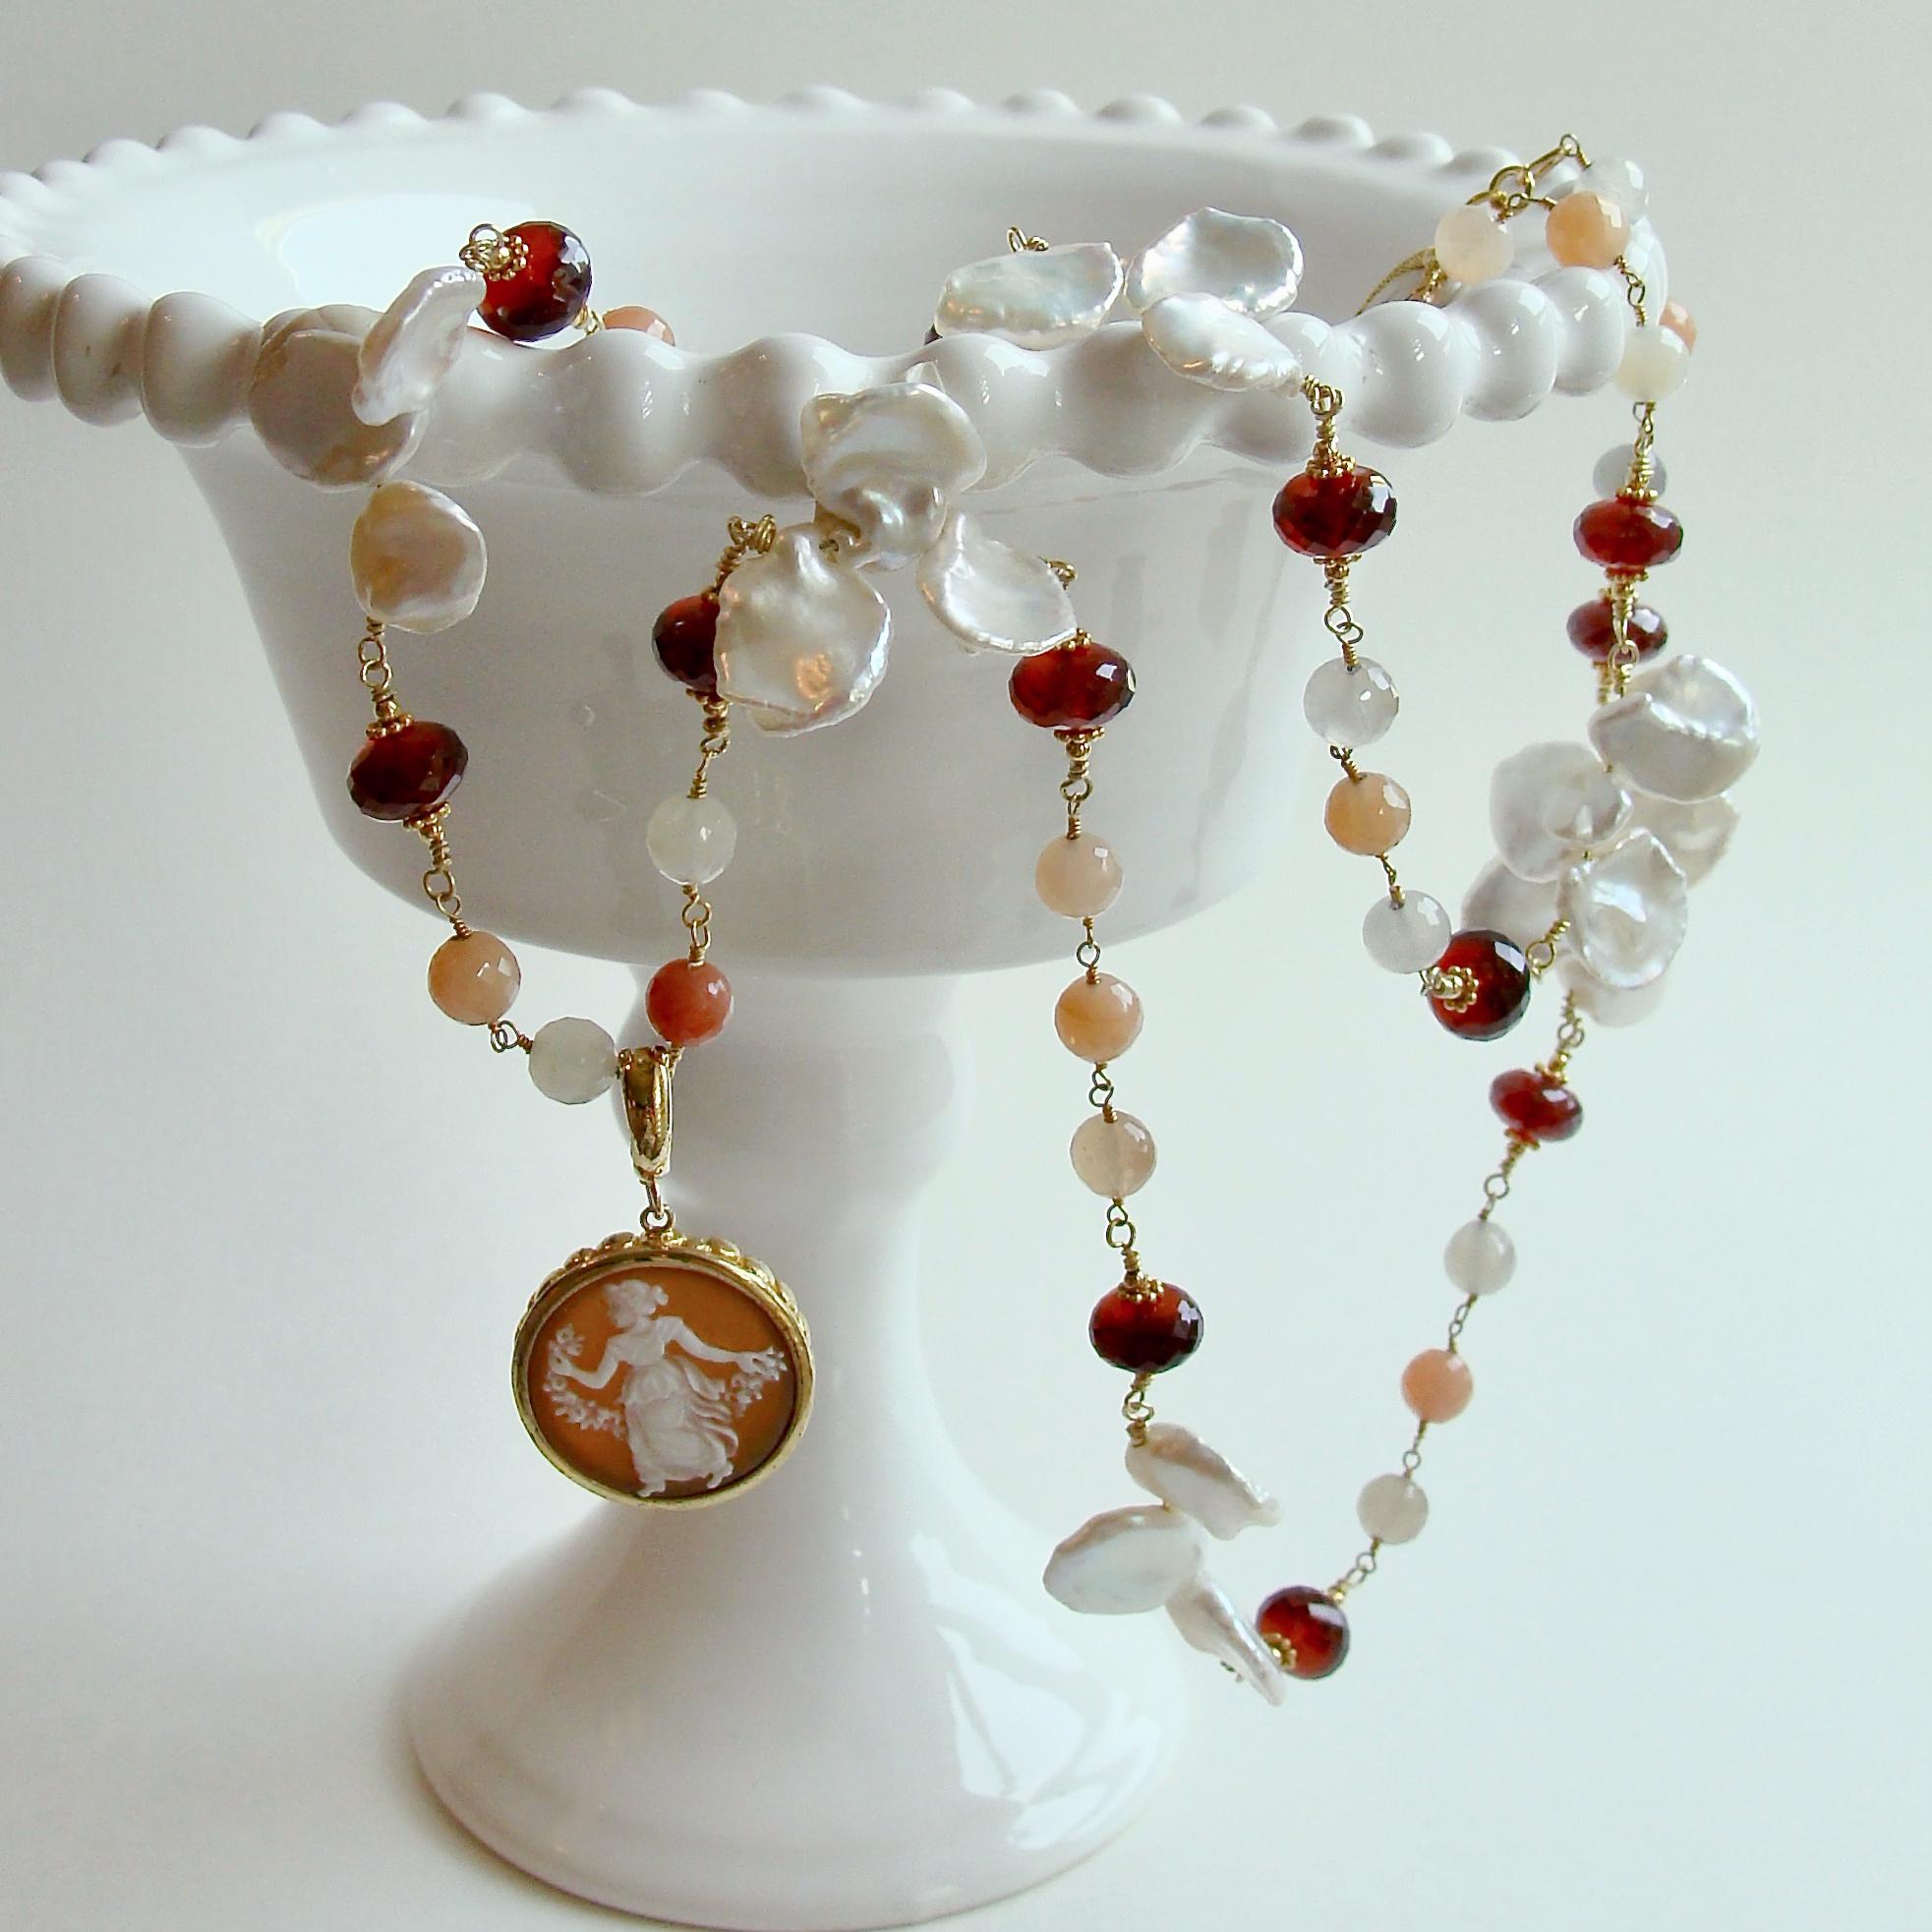 Elegant facet moonstone in colors ranging from white to peach and gray are intercepted with faceted hessonite garnet rondelles.  The colors found in the necklace repeat the colors also found in the removable bail sardonyx cameo pendant.  This